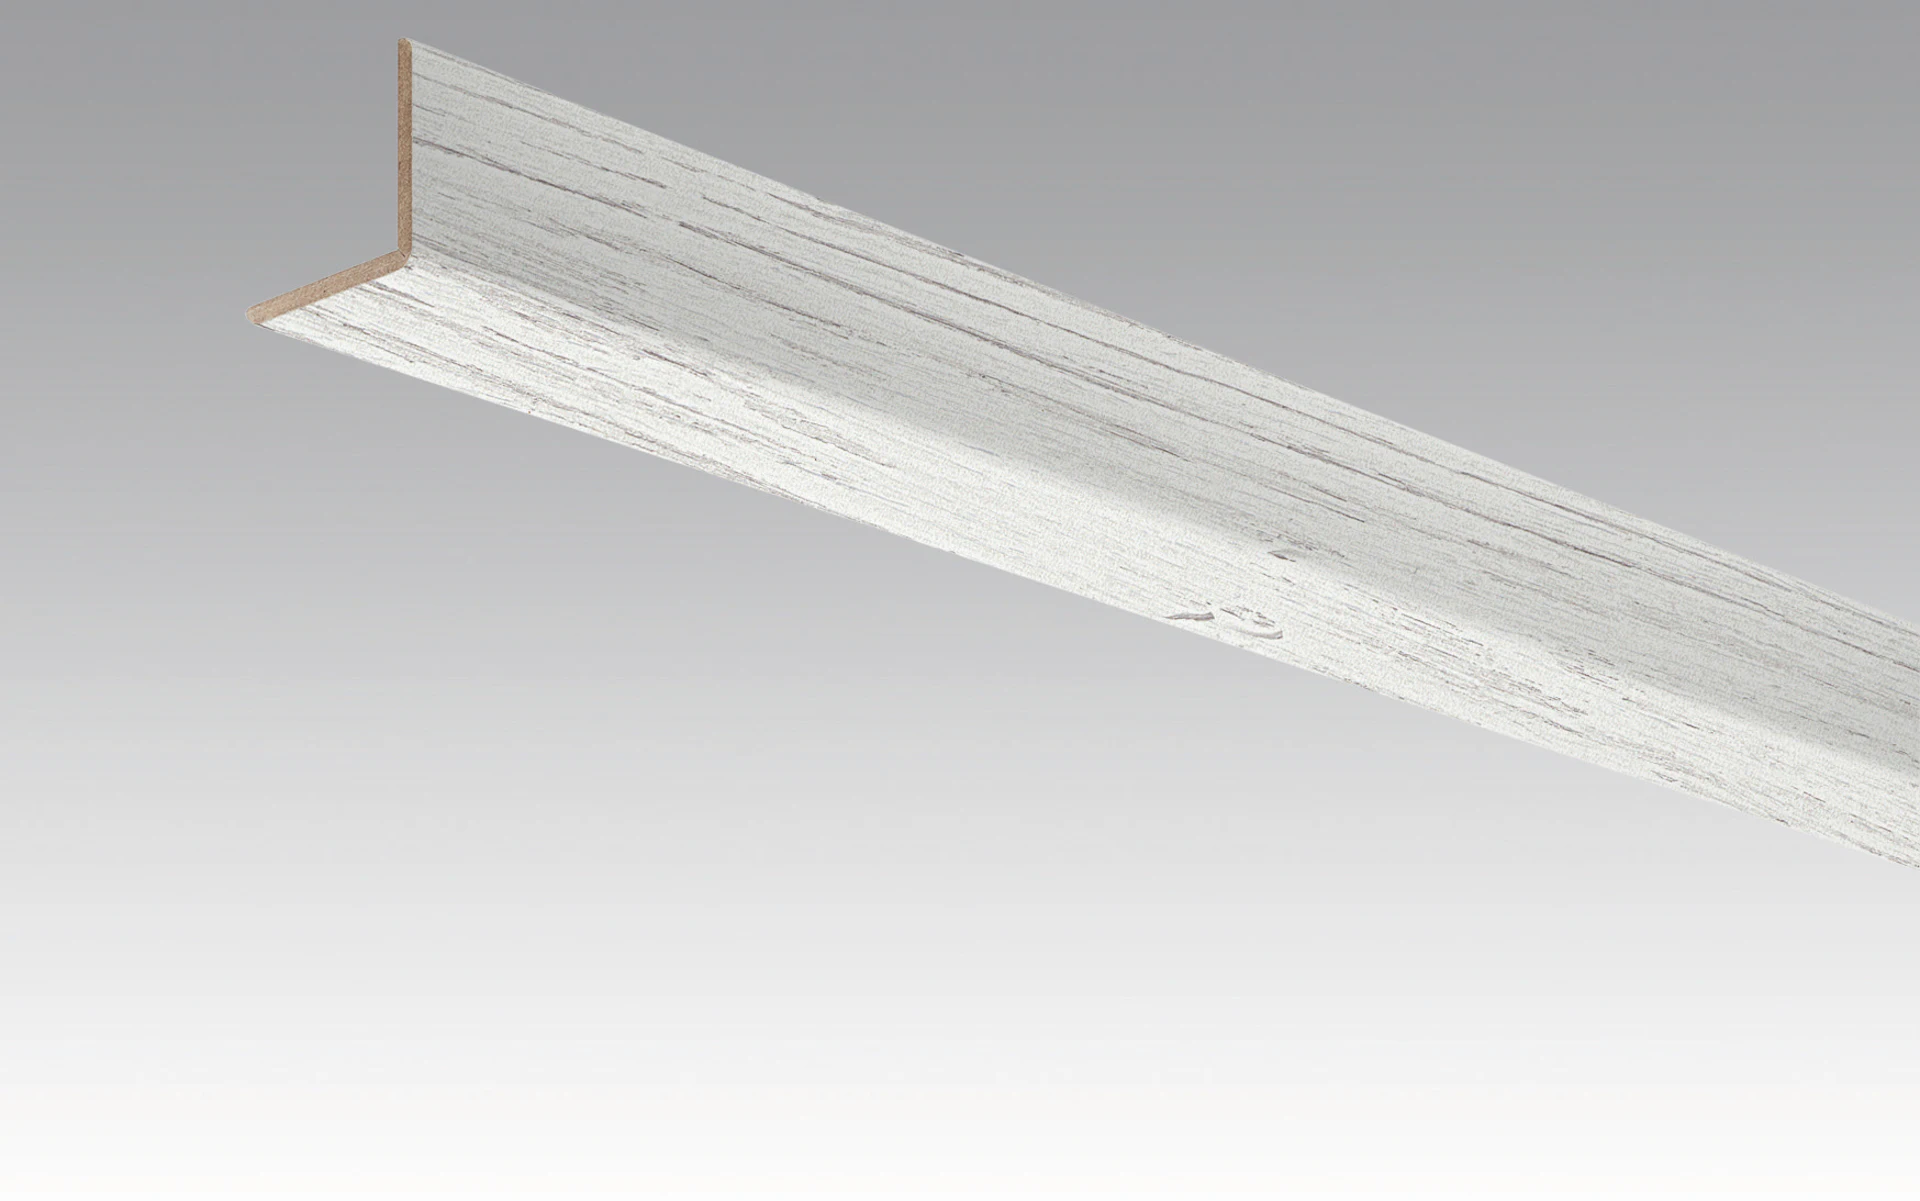 MEISTER Skirting Boards Angle Skirting White Pine 4088 - 2380 x 33 x 3.5 mm (200035-2380-04088)